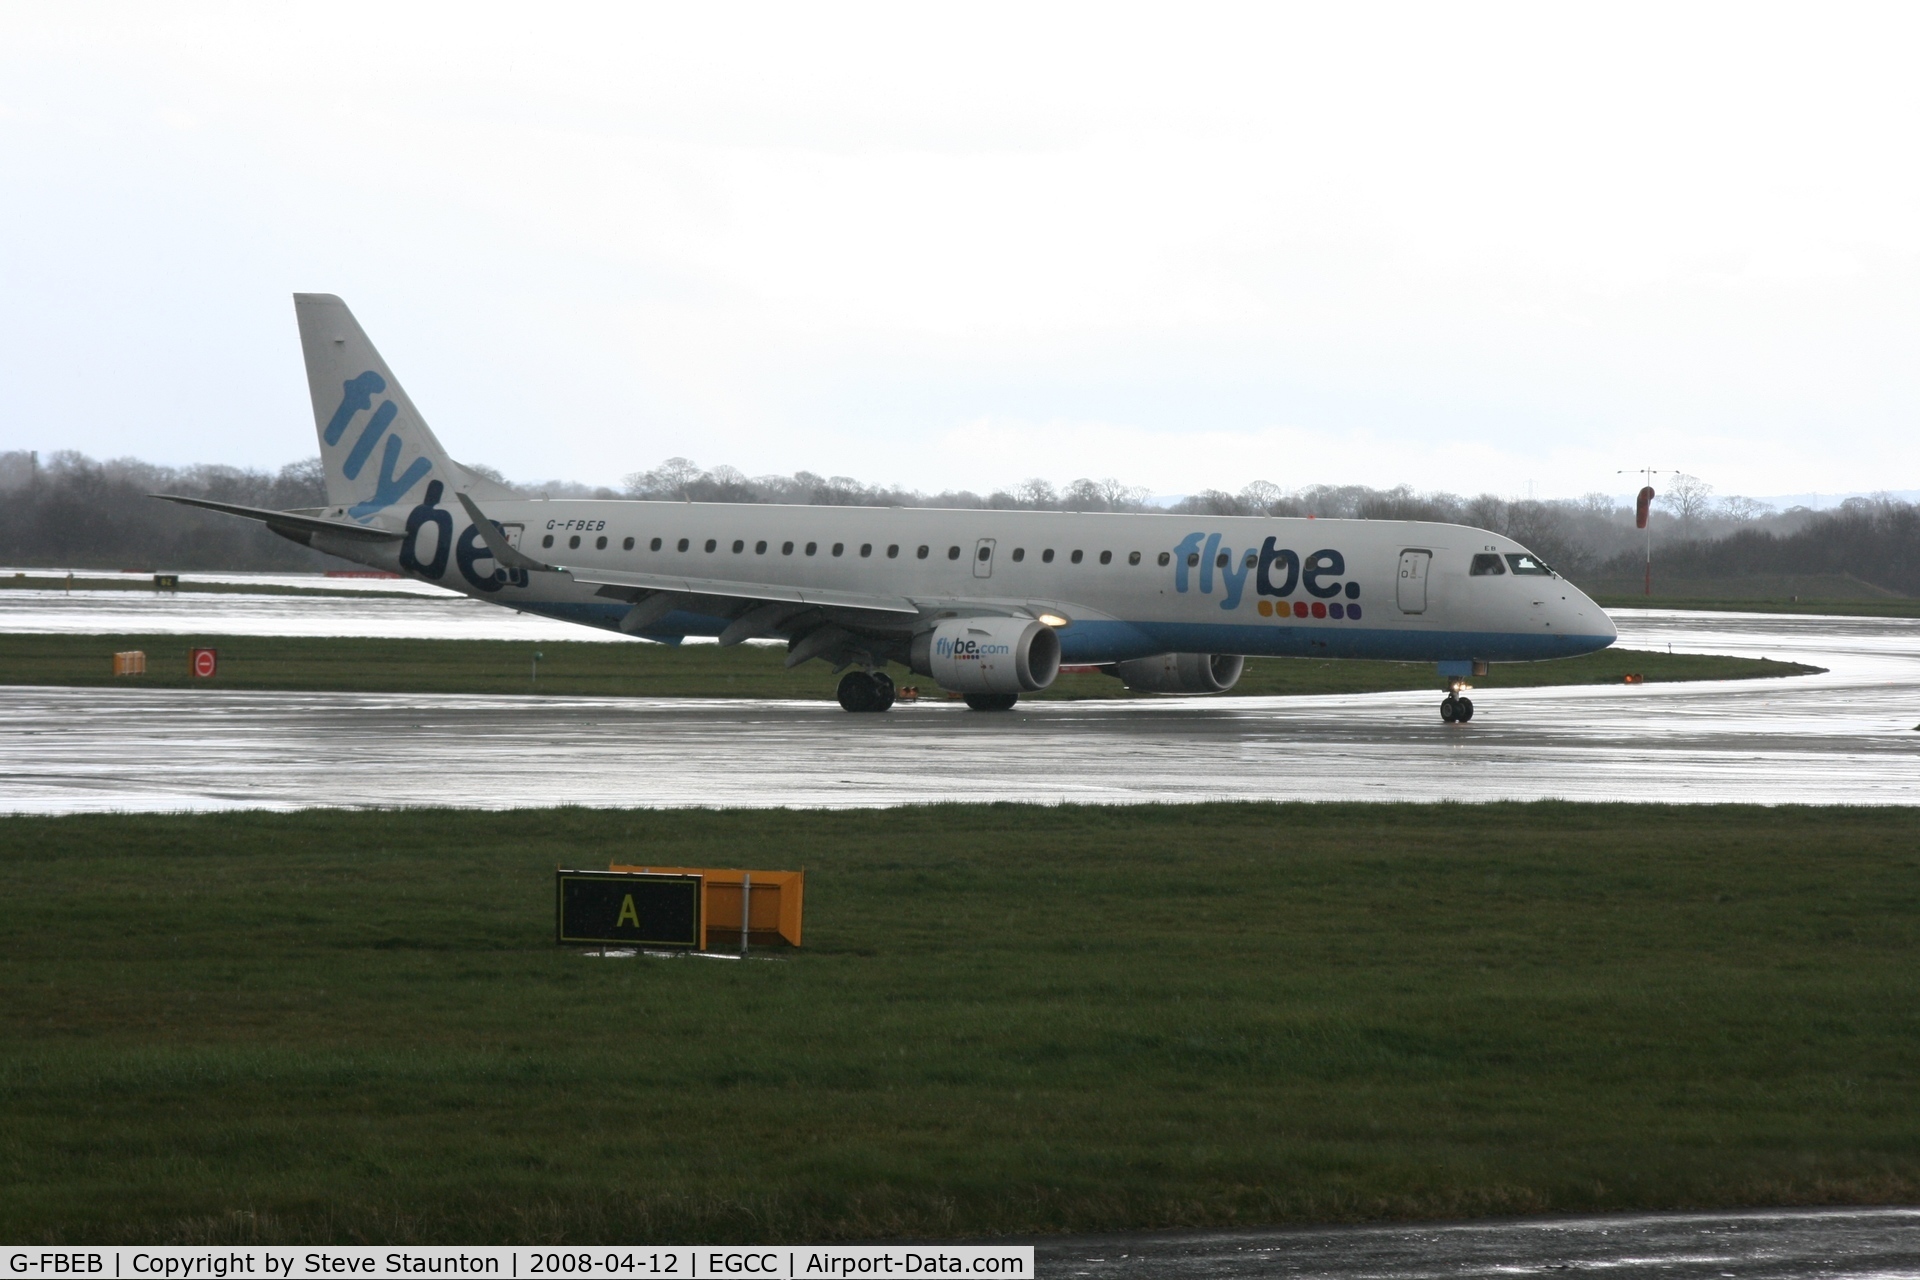 G-FBEB, 2006 Embraer 195LR (ERJ-190-200LR) C/N 19000057, Taken at Manchester Airport on a typical showery April day